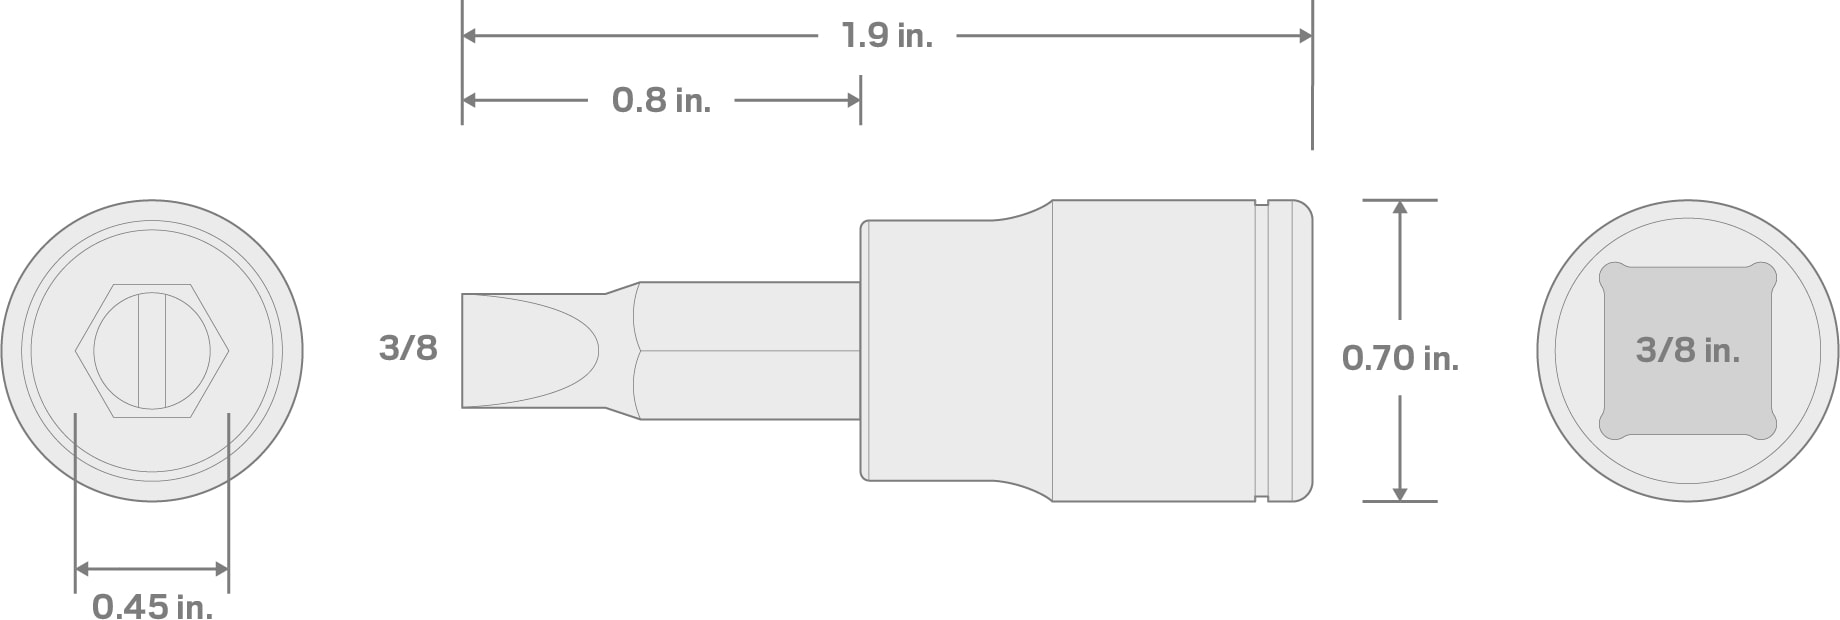 Specs for 3/8 Inch Drive x 3/8 Inch Slotted Bit Socket